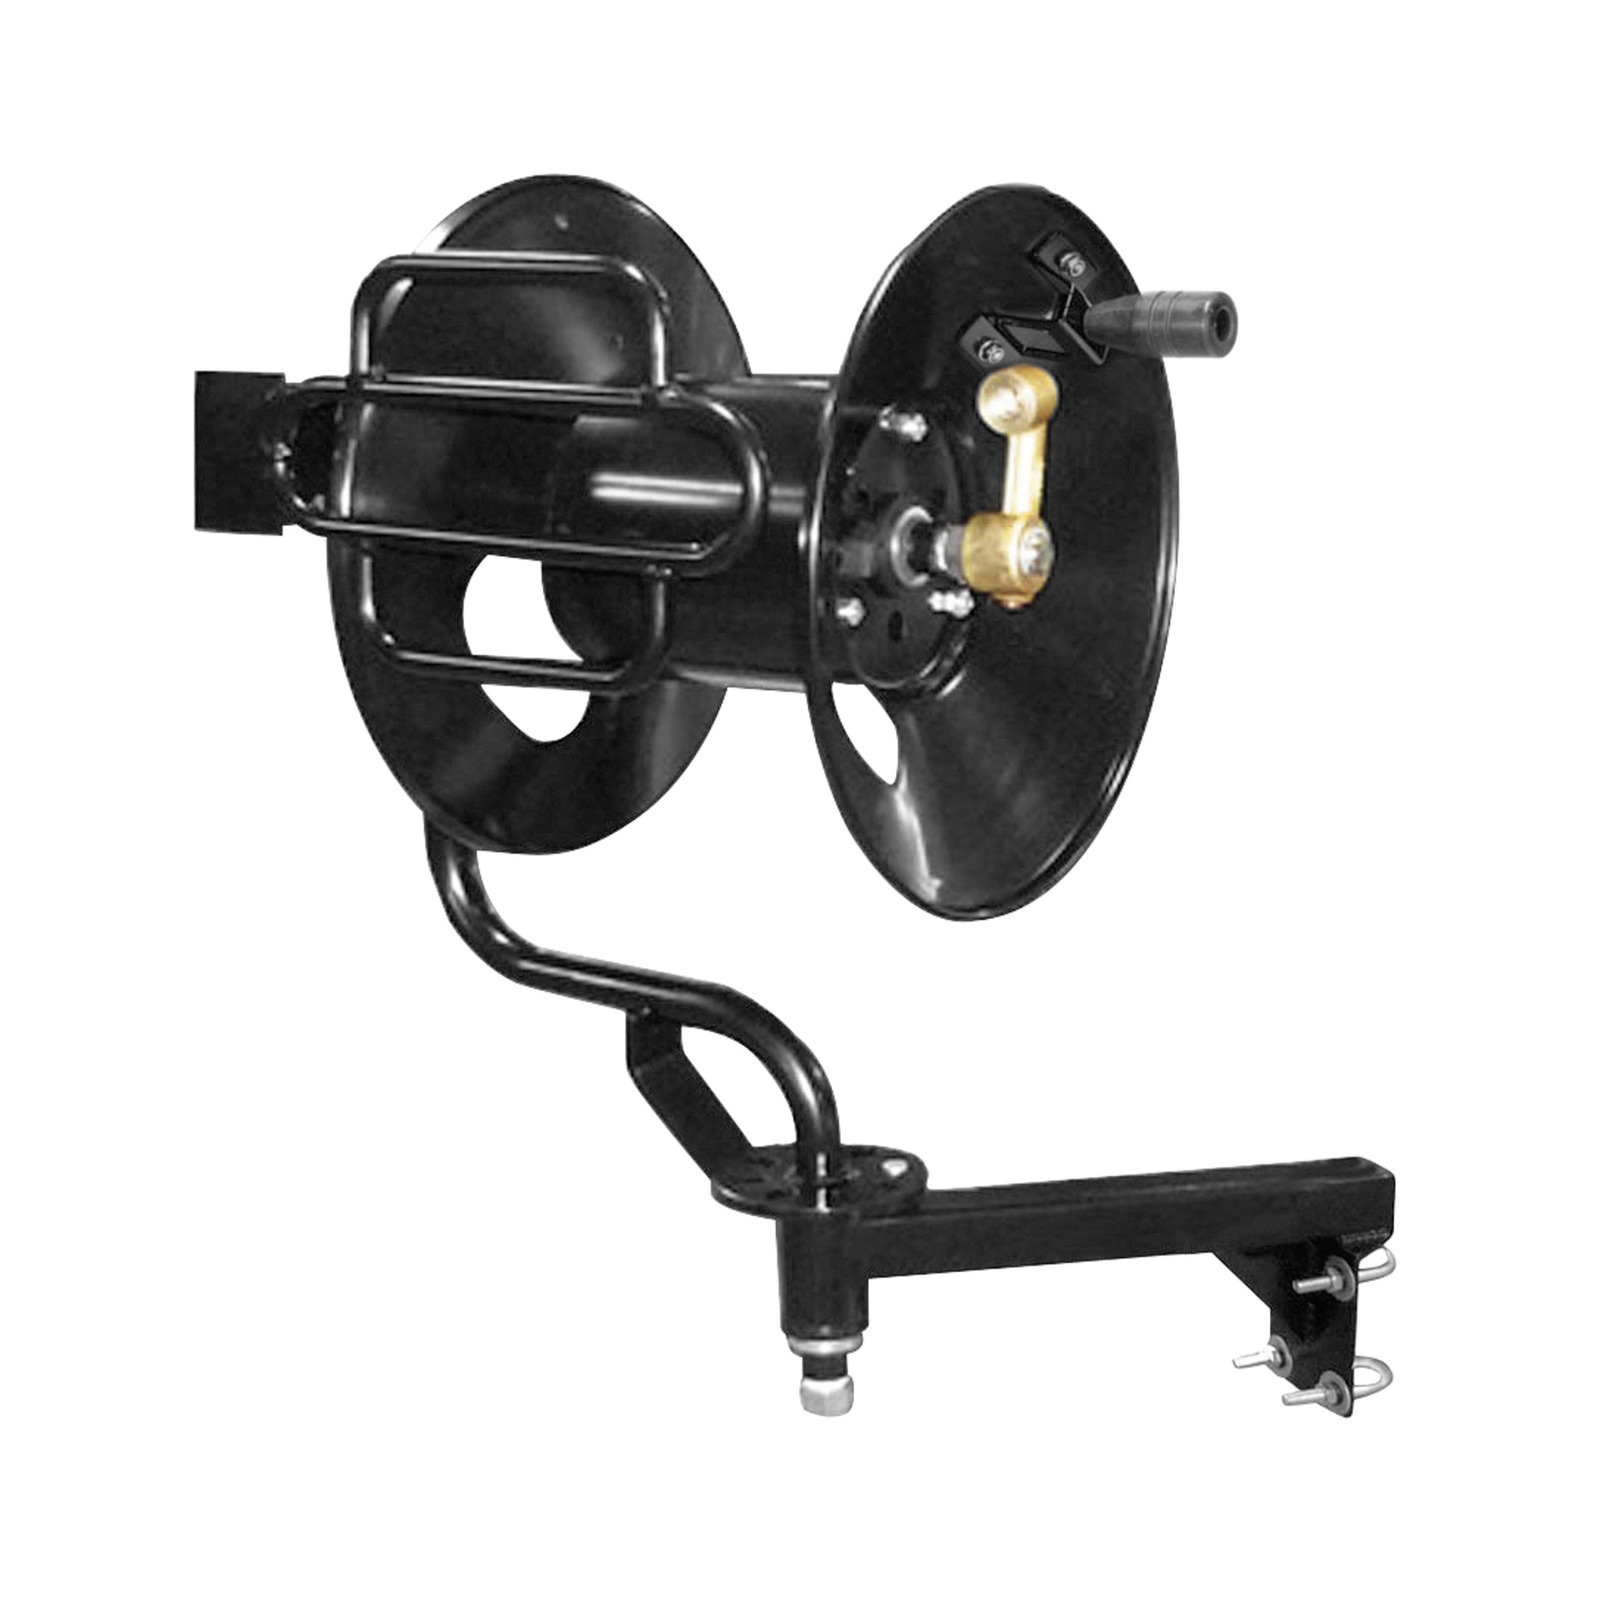 Hose Reel - Heavy Duty - Pressure Washer Parts and Supplies